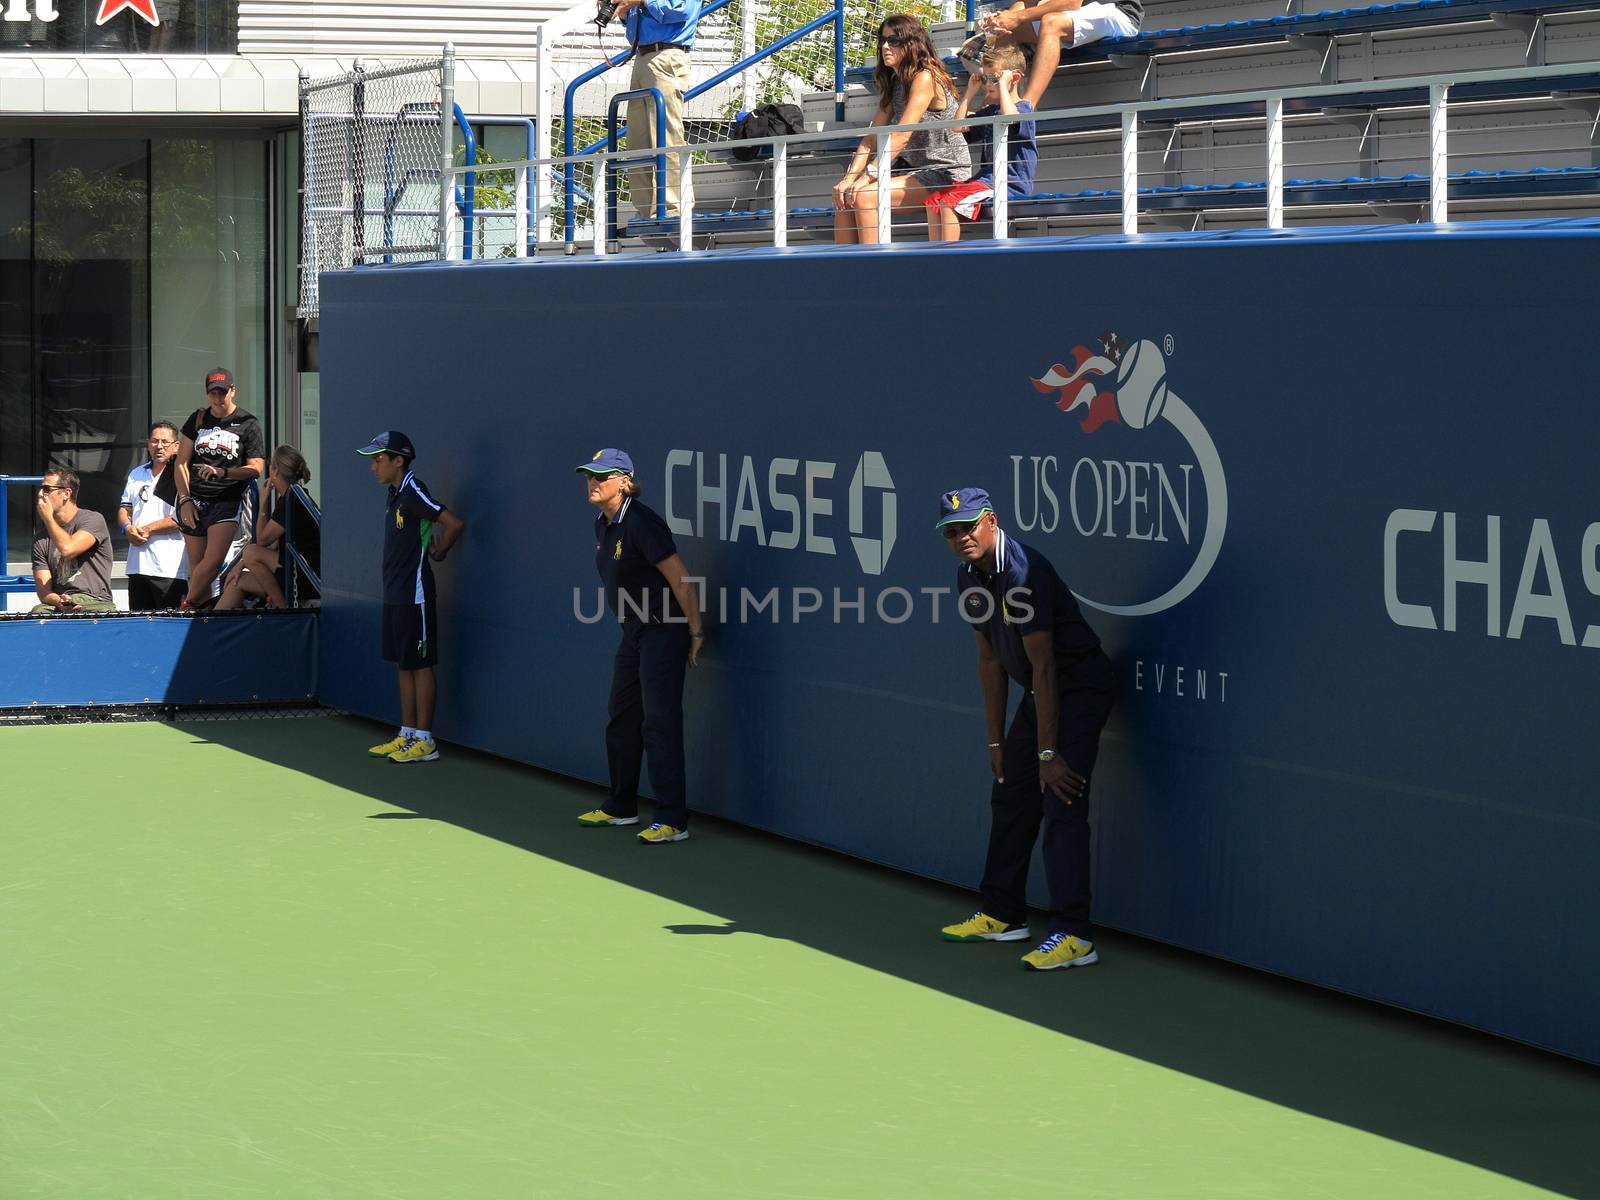 US Open Linesman and lineswoman on a side court at the Billie Jean King Tennis Center.